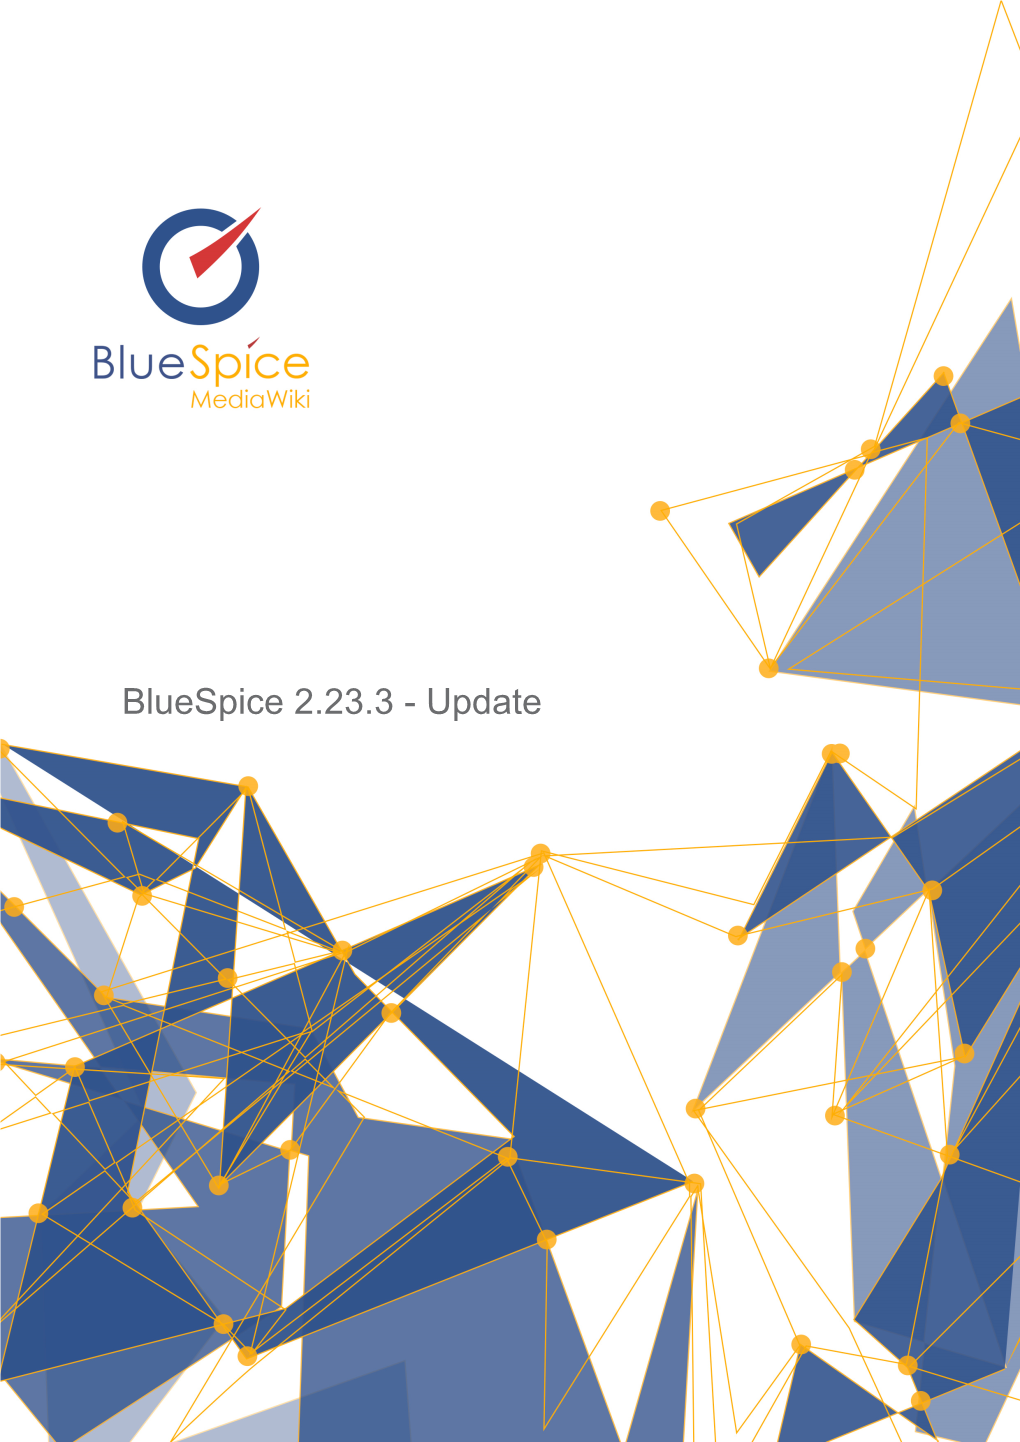 Bluespice 2.23.3 - Update Table of Contents